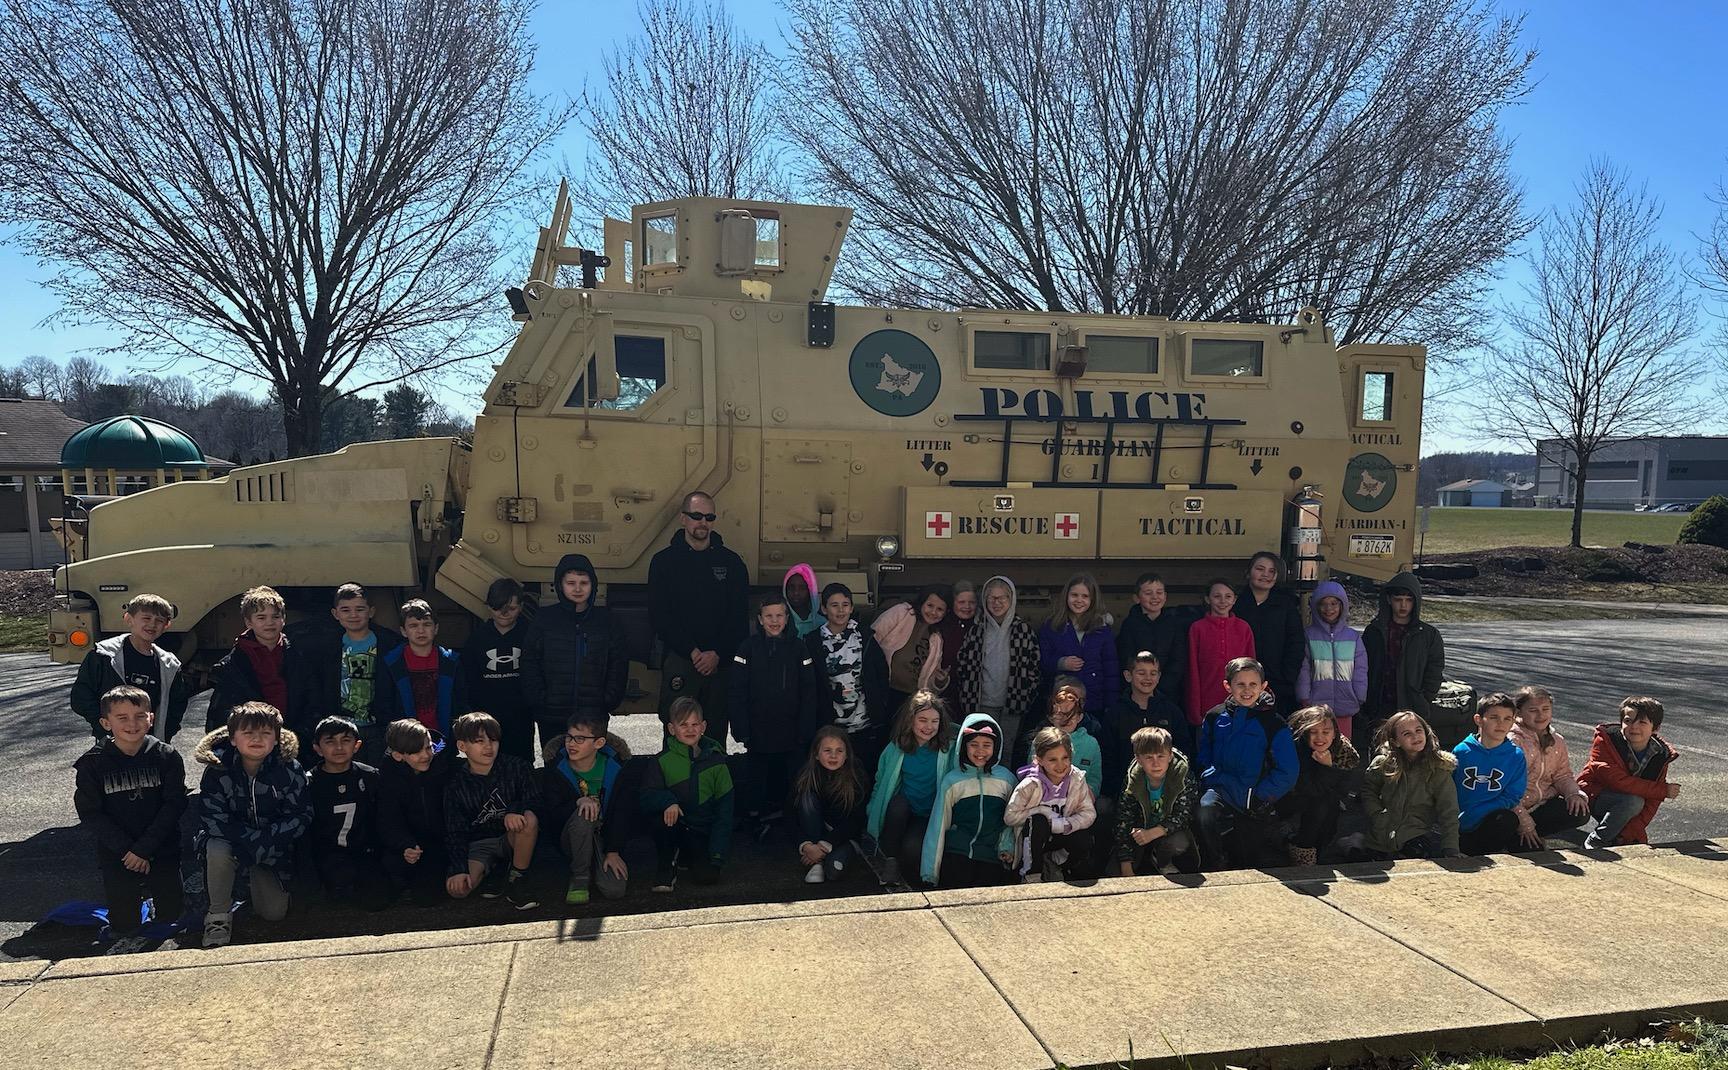 Second-grade students from McCullough Elementary were able to see the Westmoreland SWAT vehicle